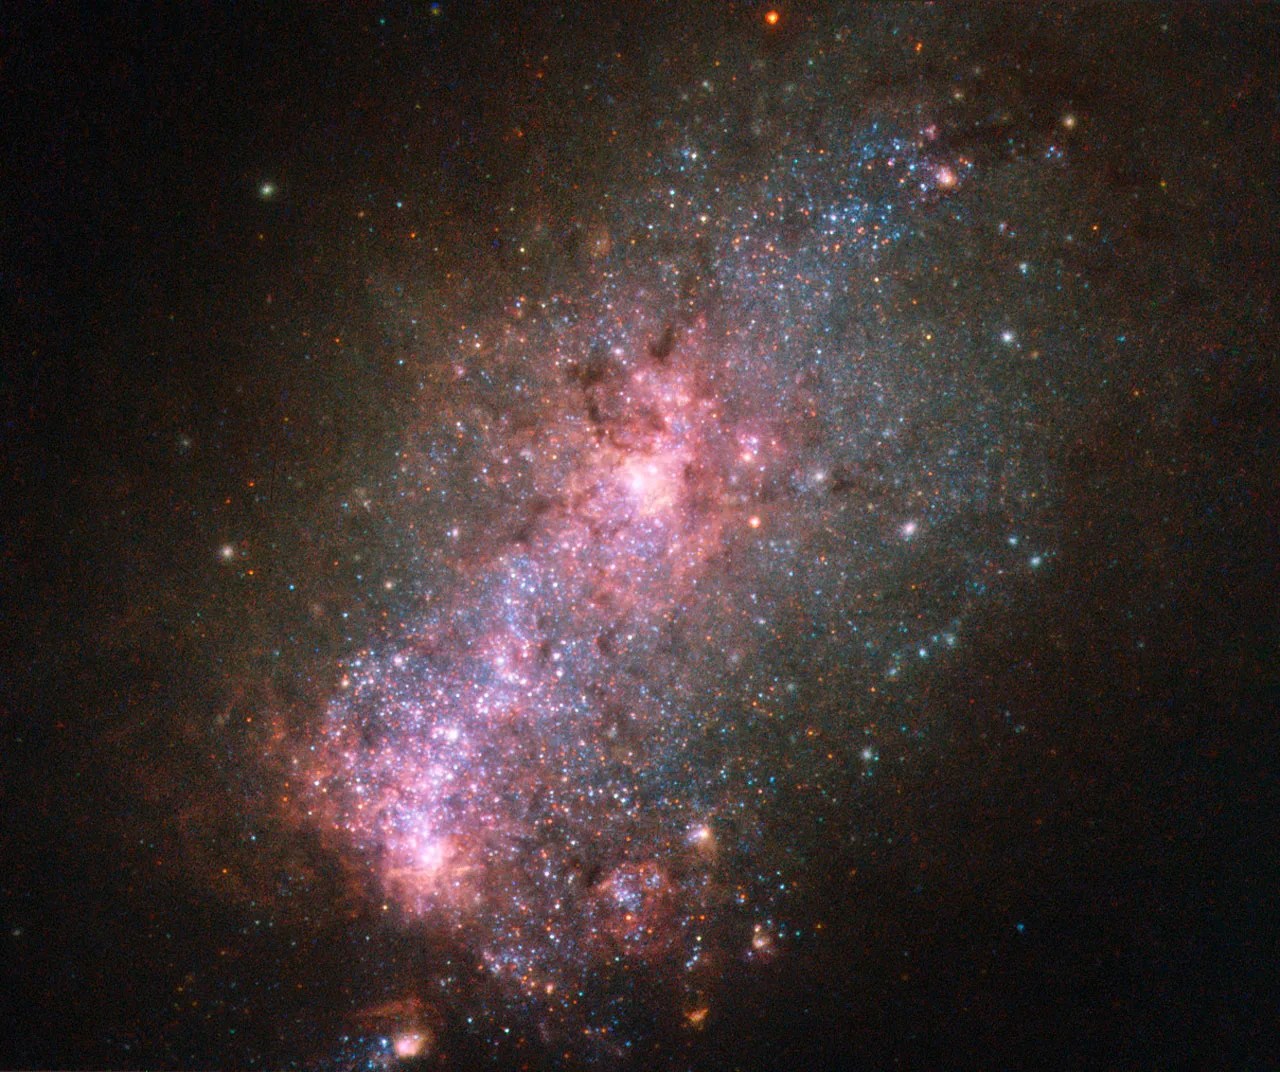 This galactic core has two bright reddish-pink concentrations of stars and gas, with pink and blue stars between them.